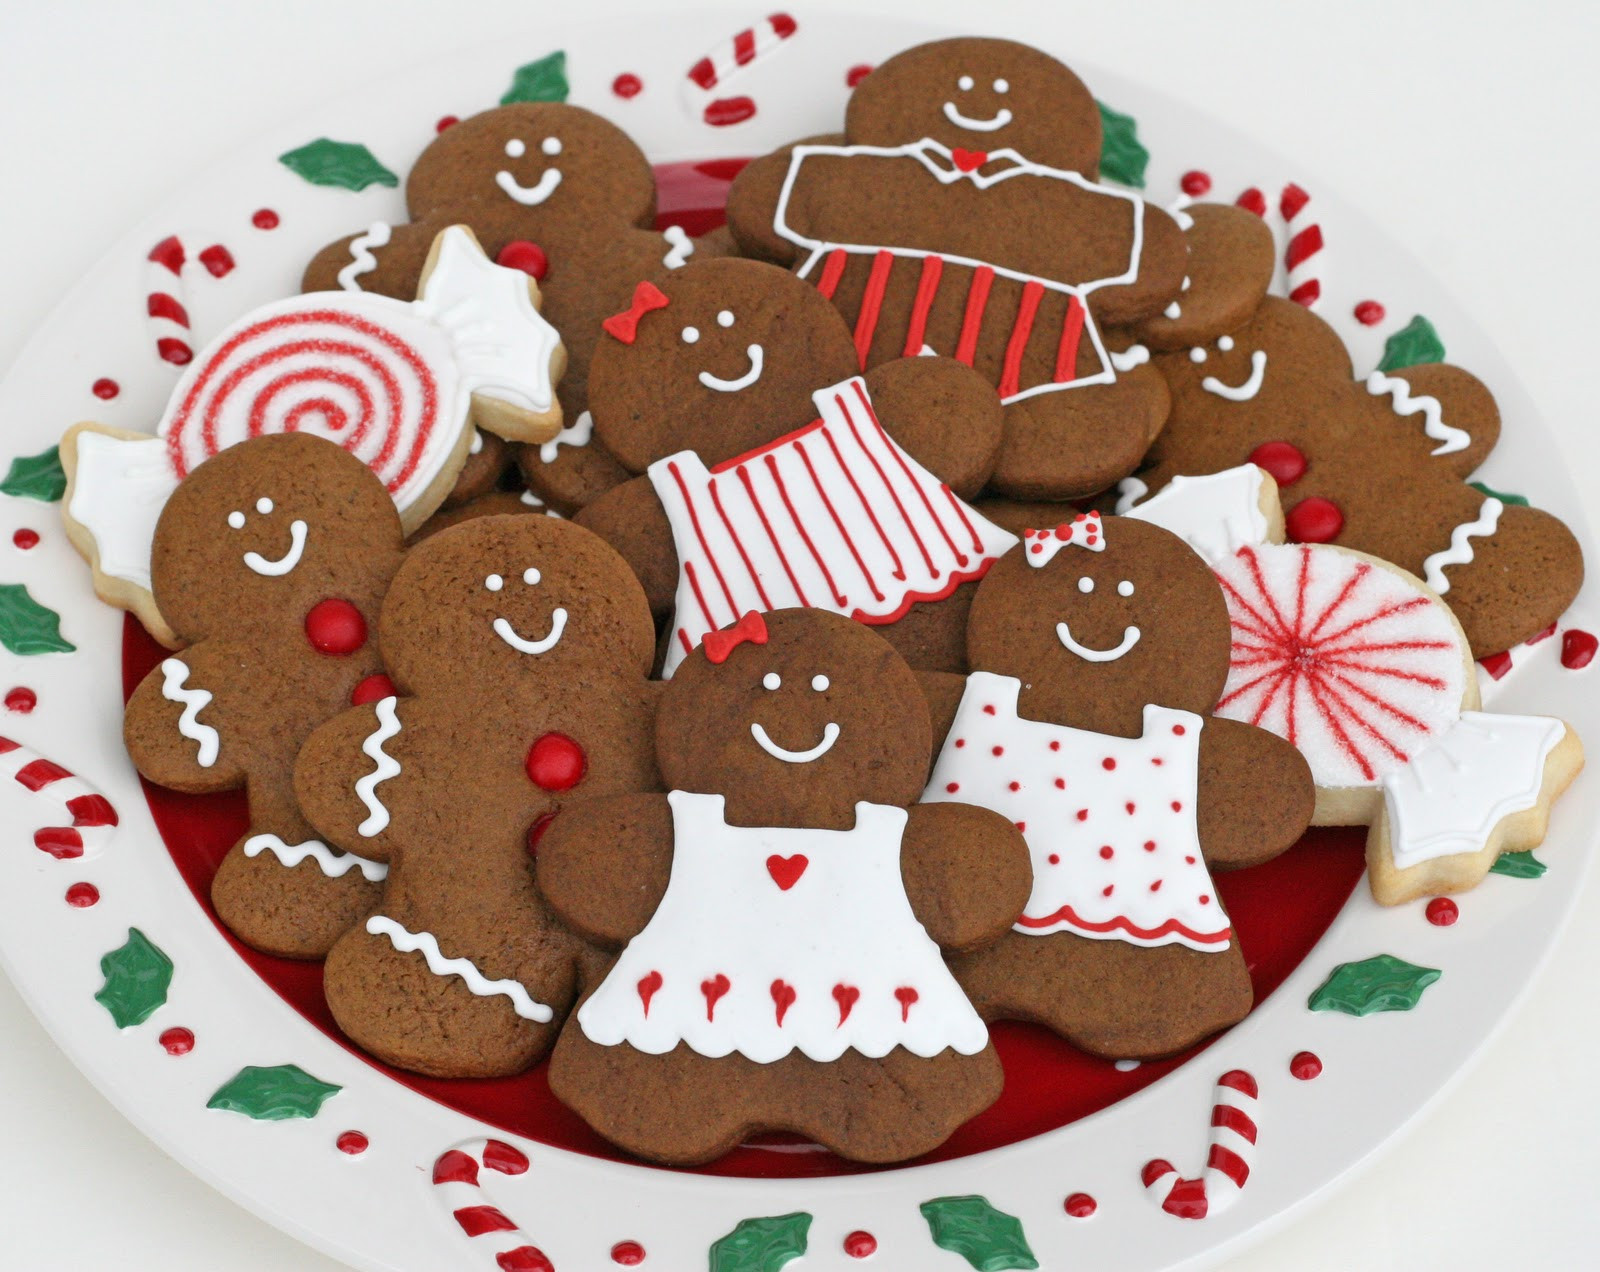 Decorating Gingerbread Cookies
 Sweet Parties A Gingerbread Party – Glorious Treats